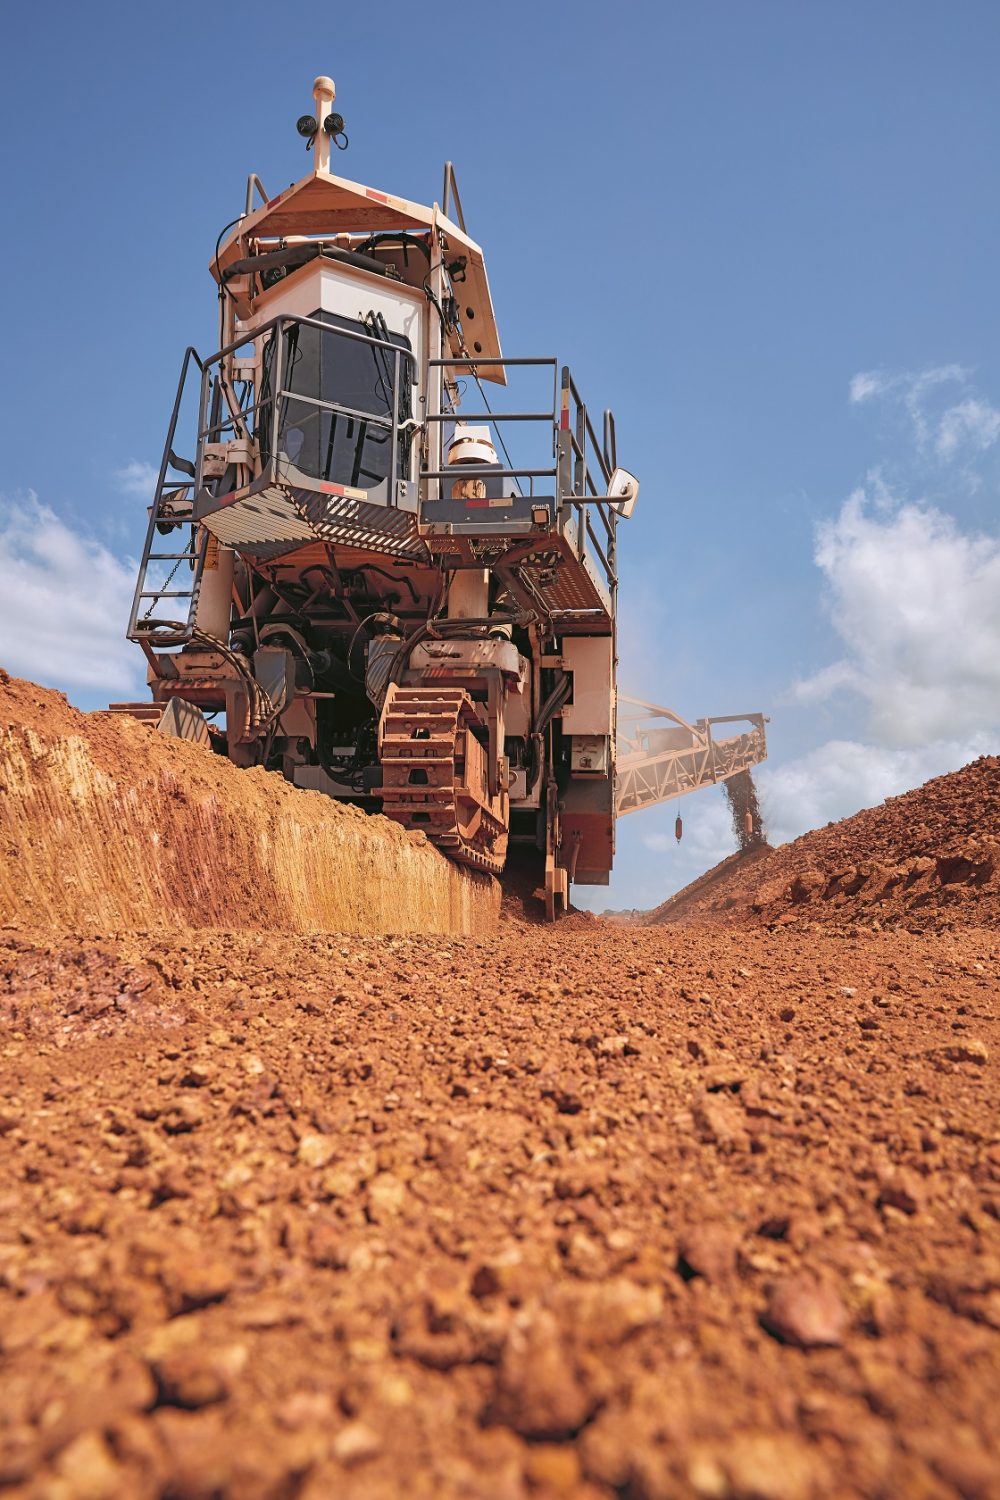 During the mining process, Wirtgen machines produce level surfaces that serve as stable roadways, facilitating rapid transportation of the mined material. During this process, the LEVEL PRO leveling system collects and transmits data on the leveling process and controls the cutting depth from the operator’s stand.